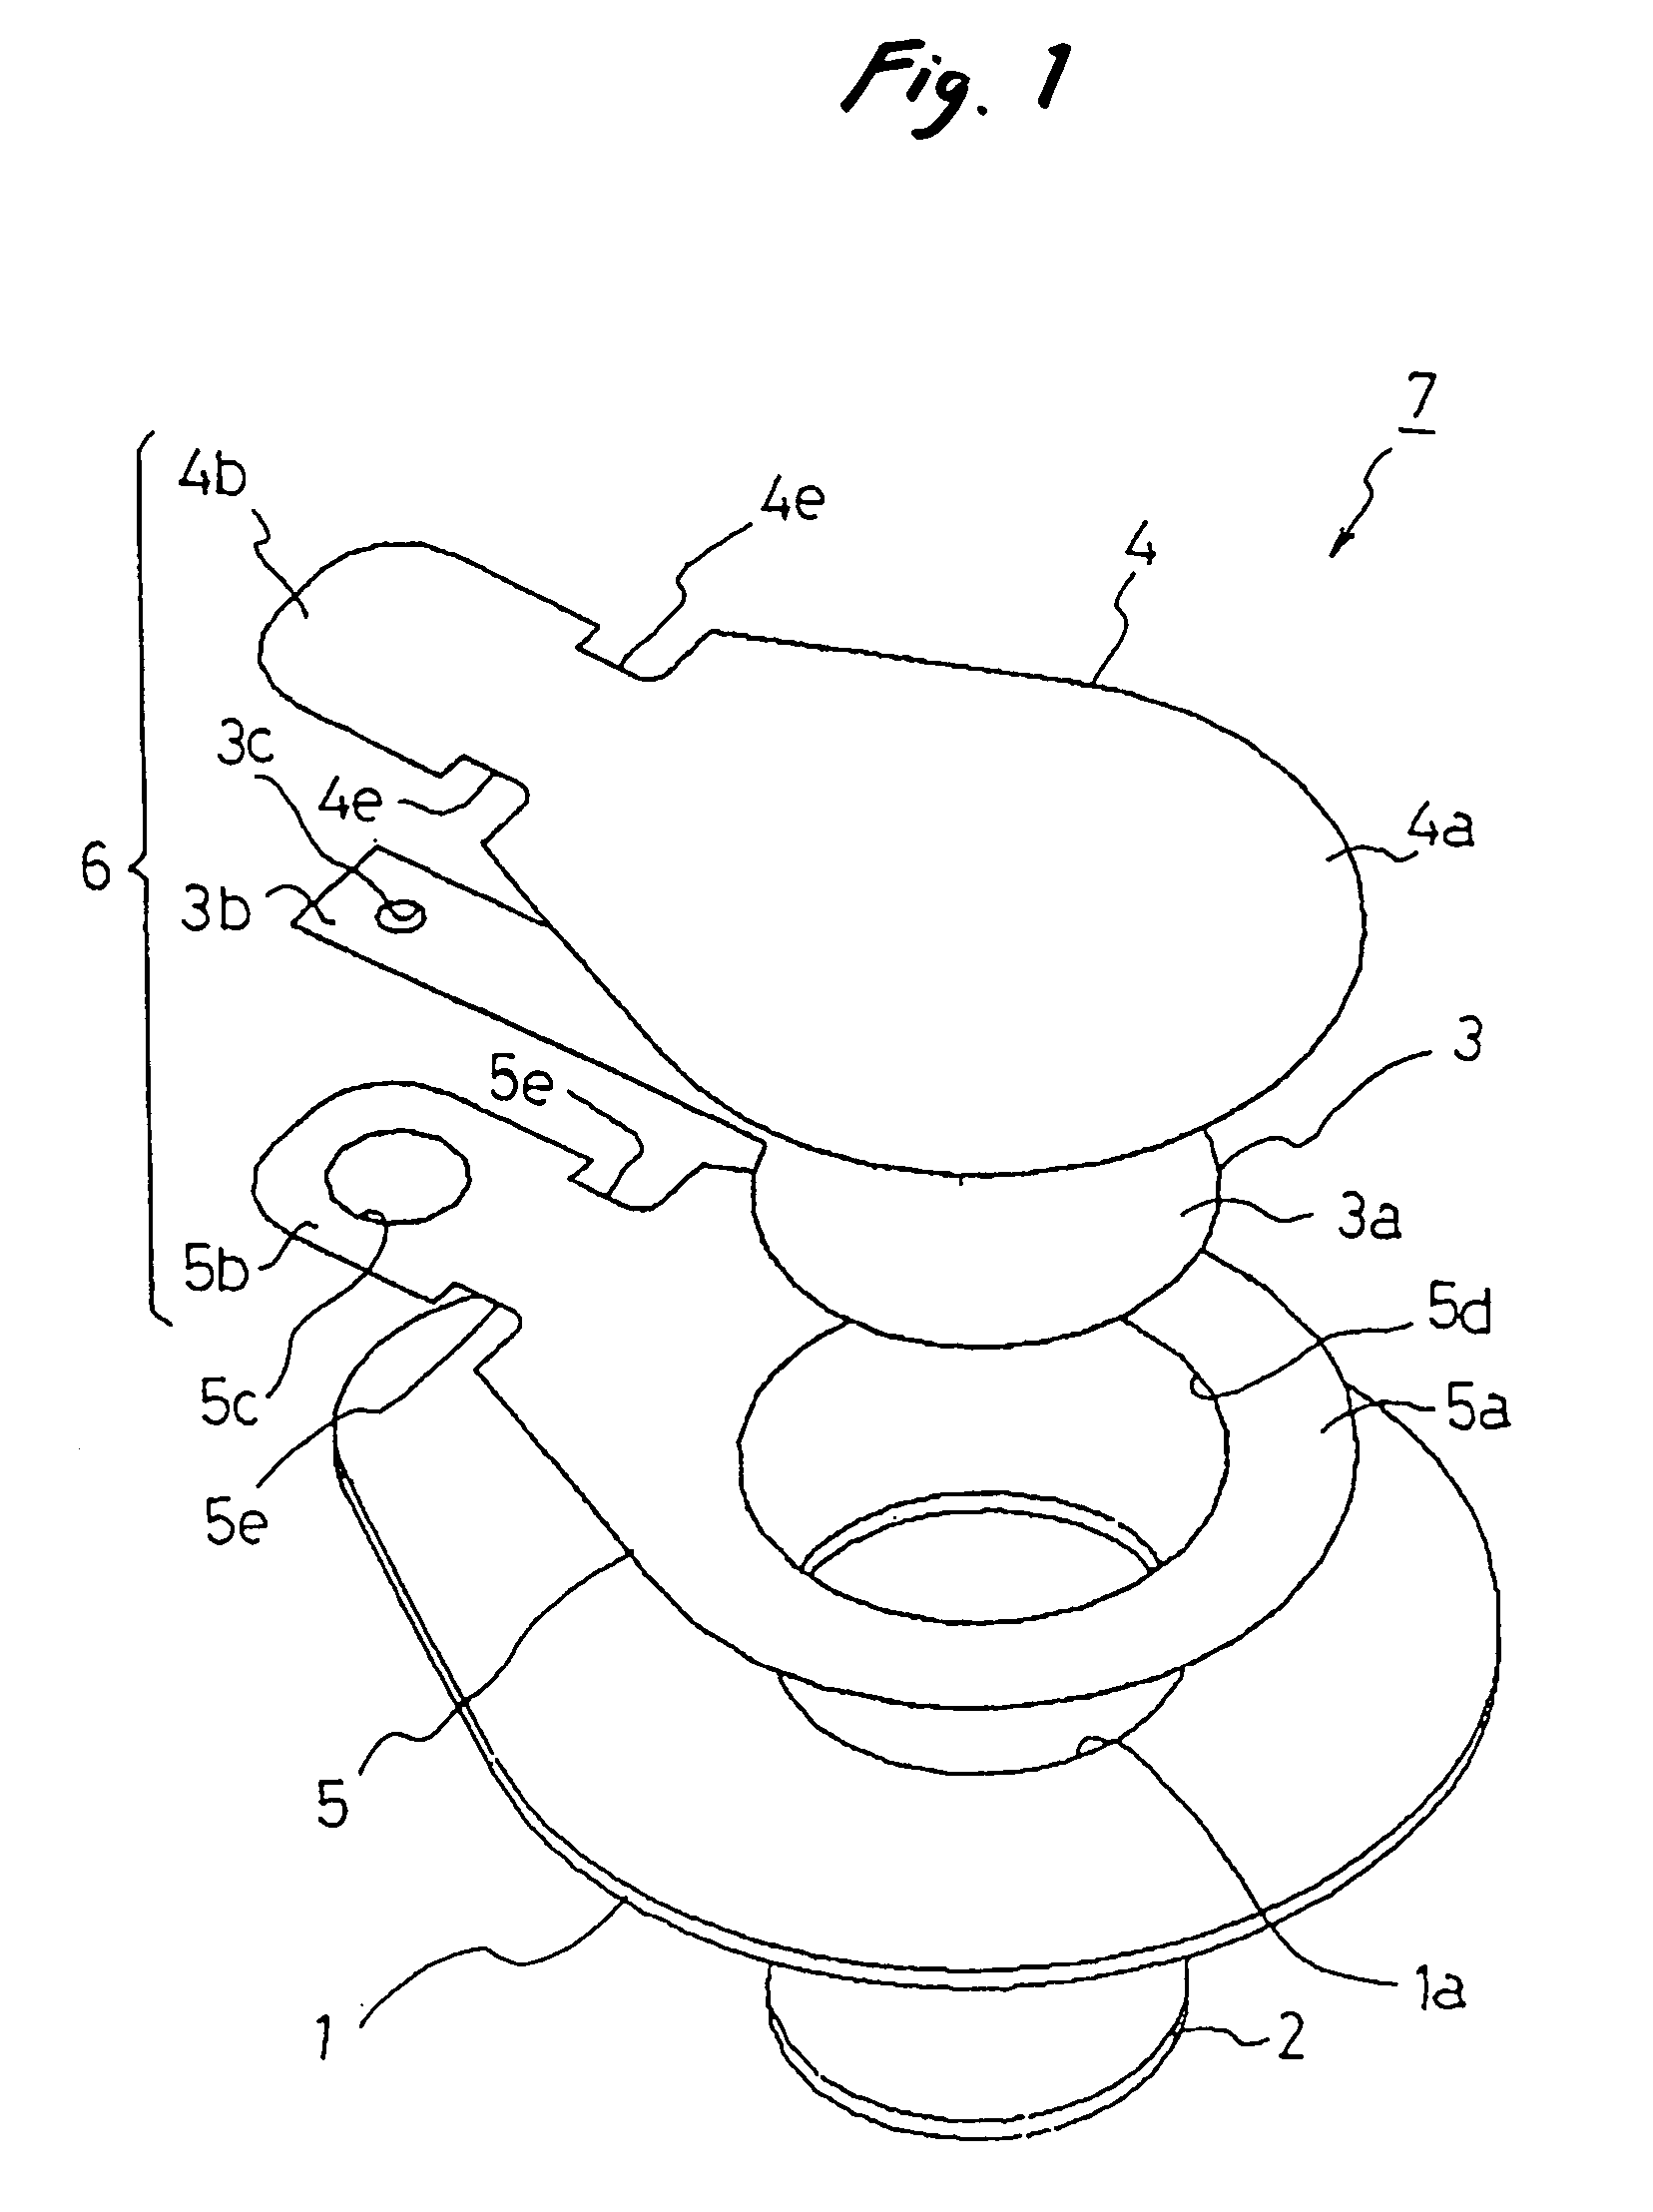 Biological electrode and connector for the same